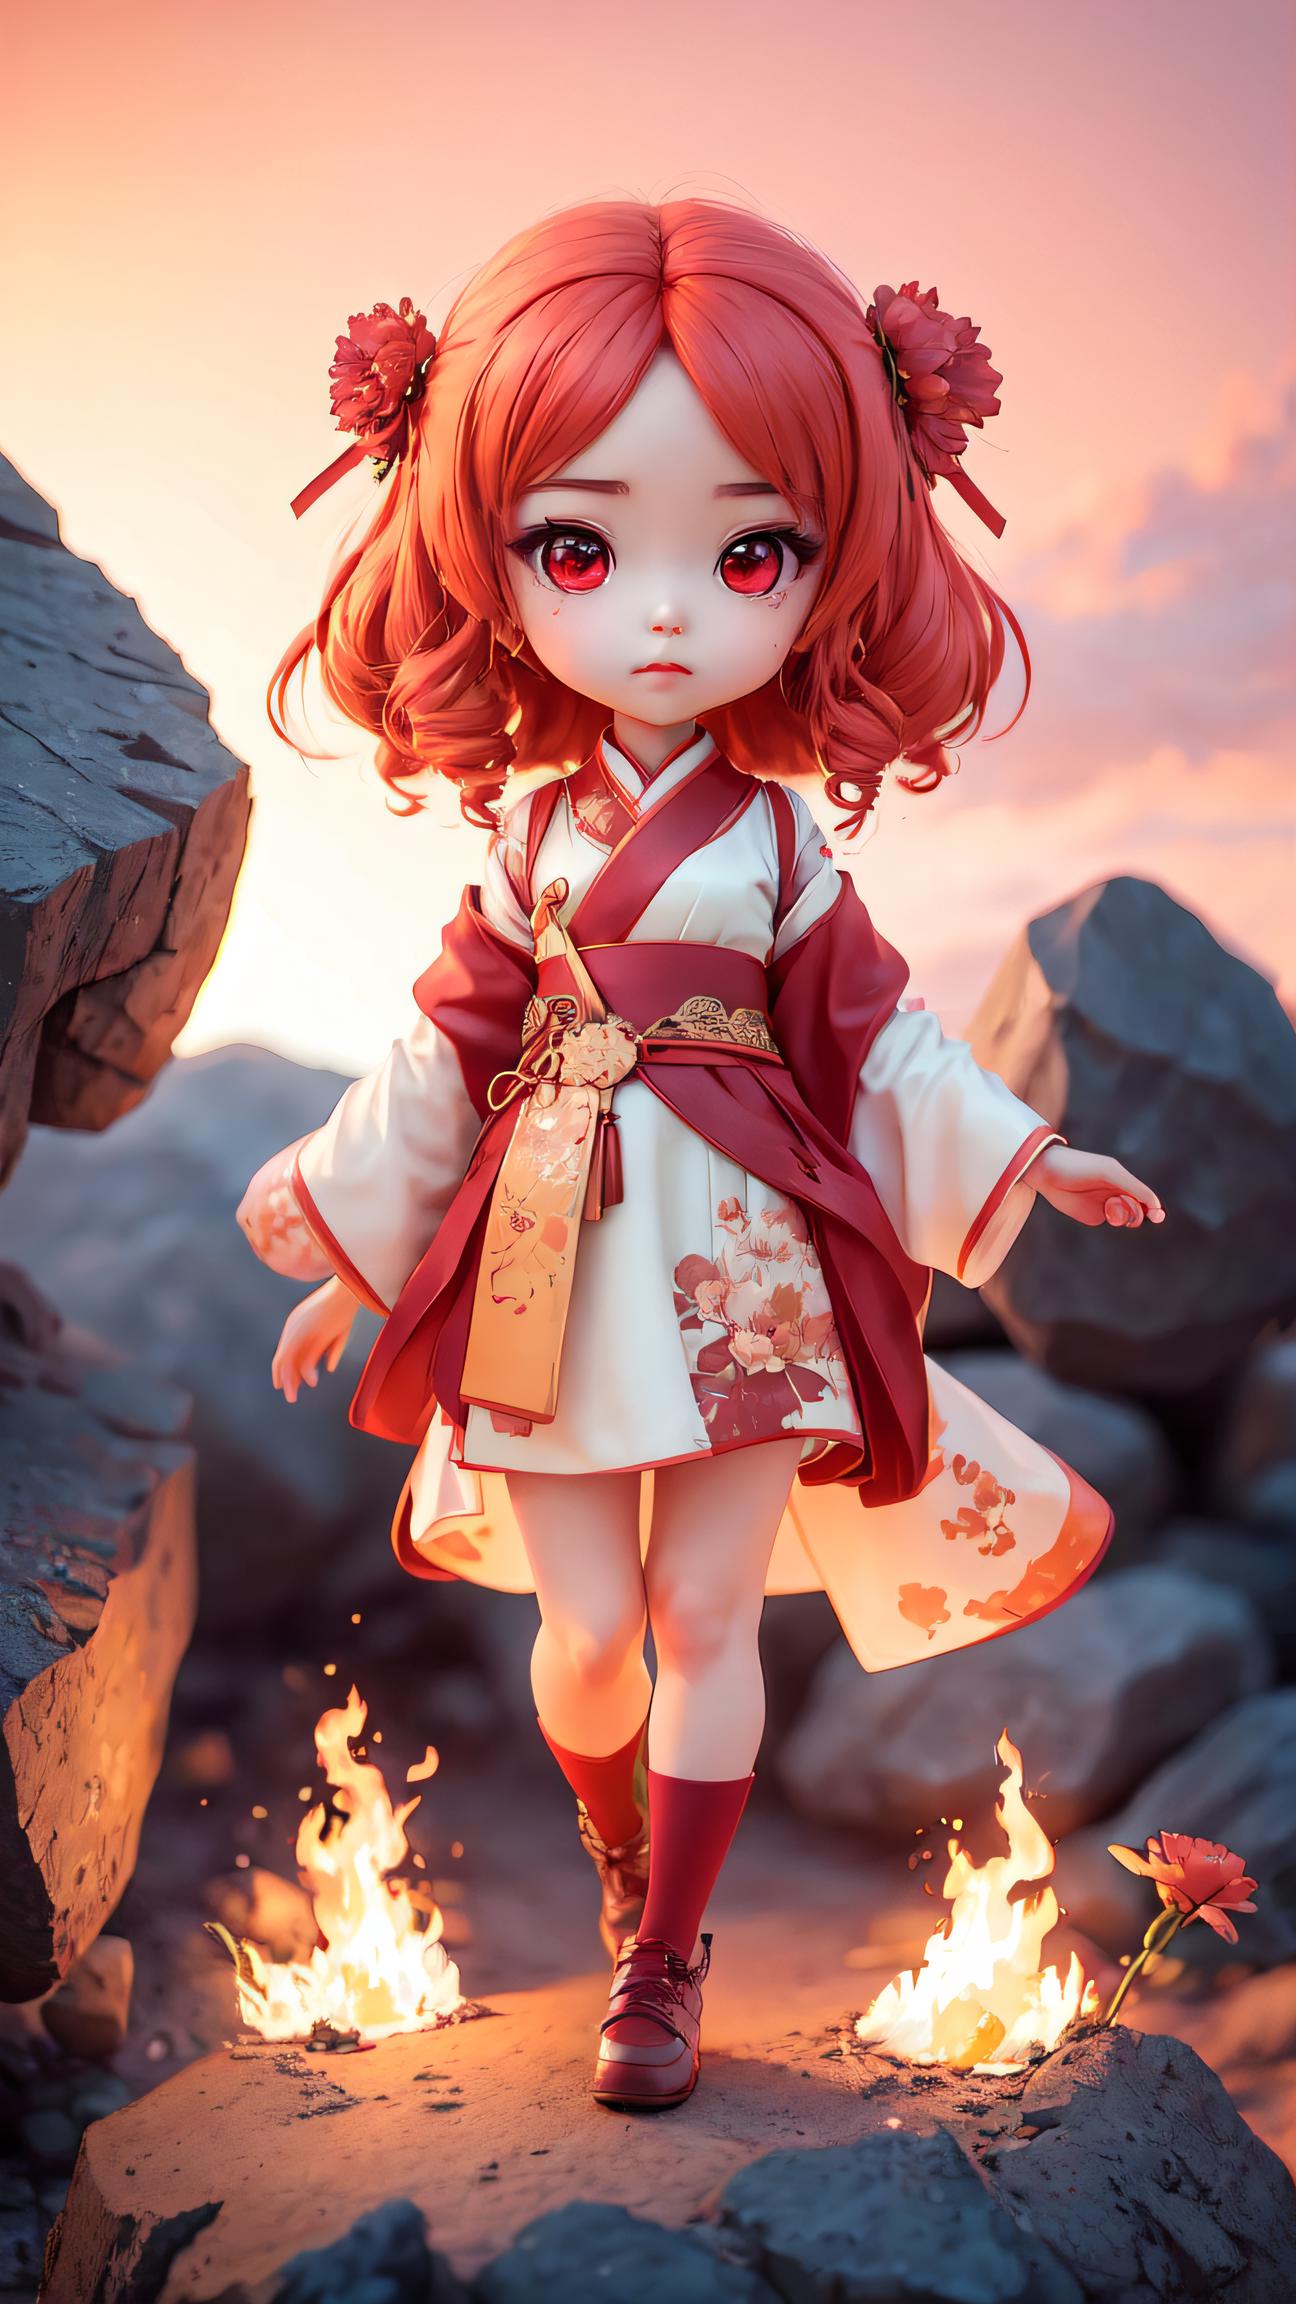 An Anime Doll with a Red Bow, Standing on Rocks, Wearing a White Kimono with Red and Orange Flowers.